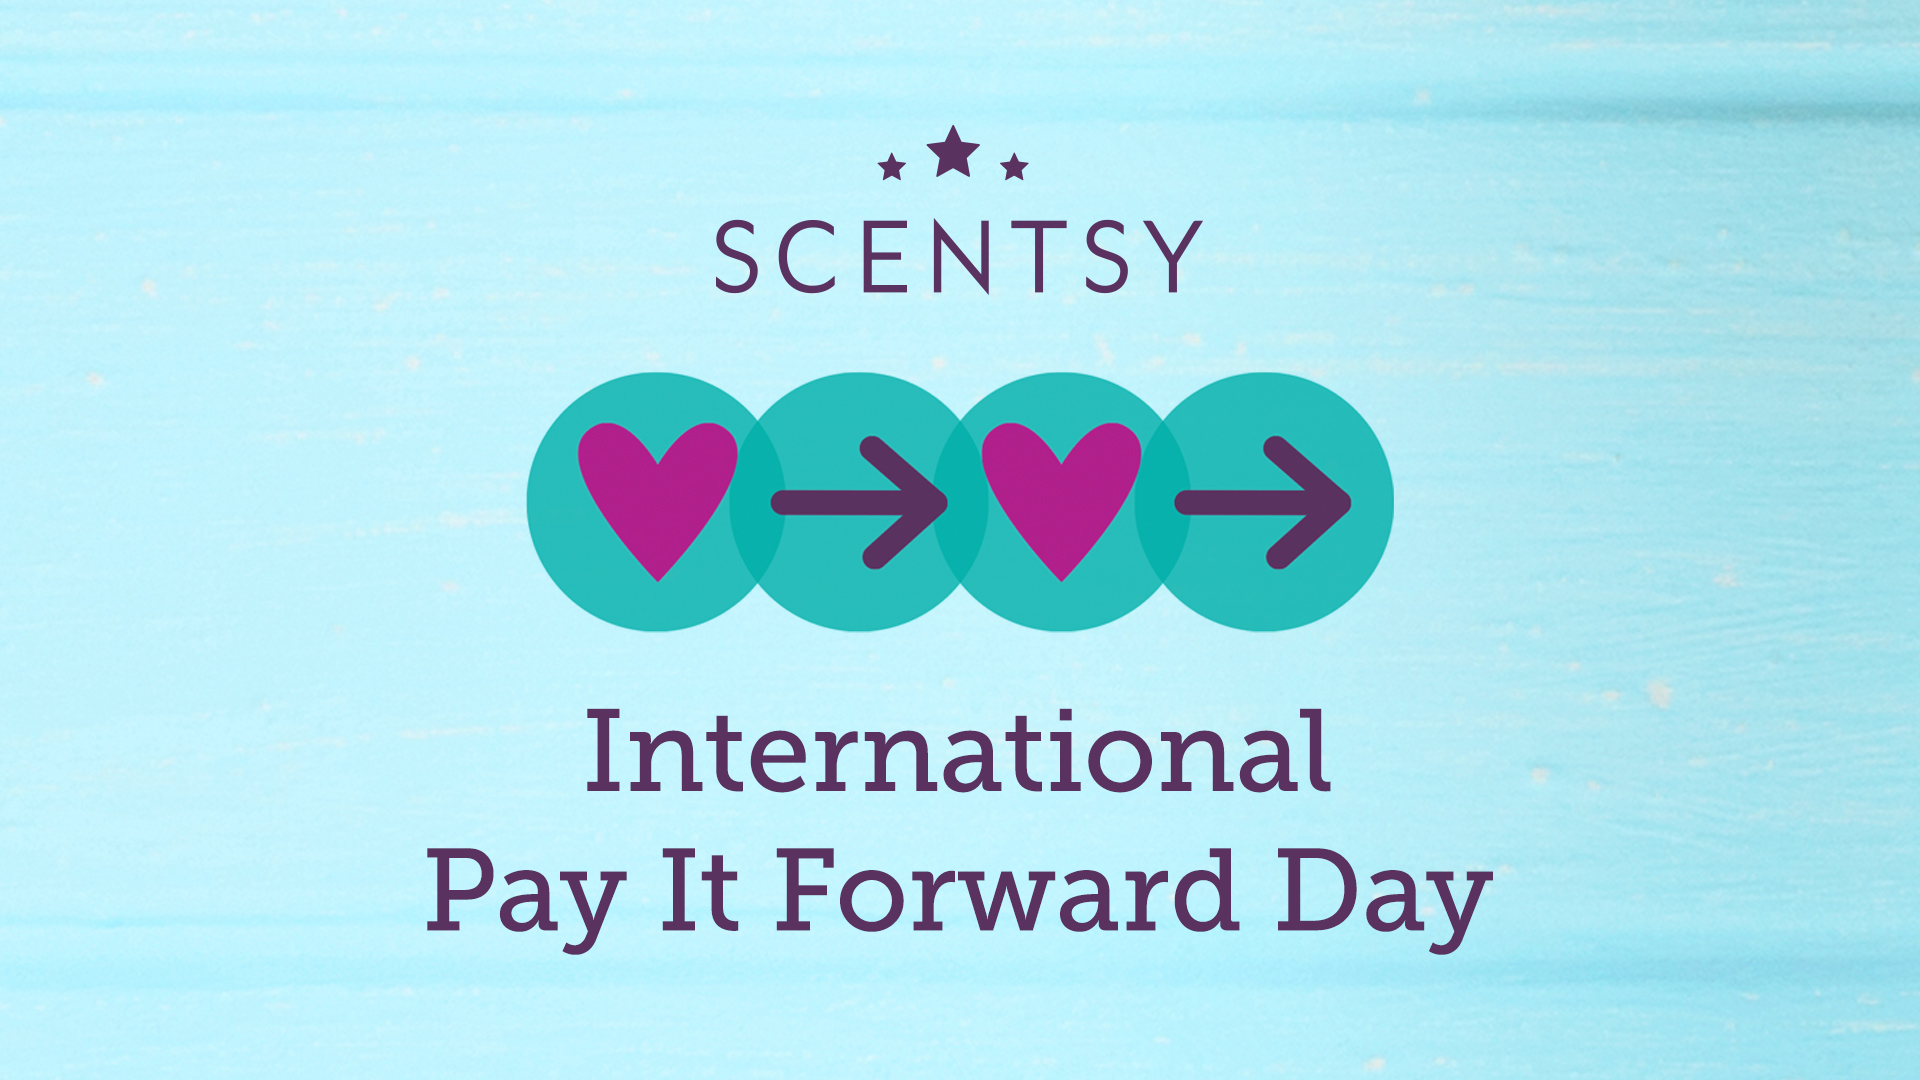 International Pay It Forward Day with Scentsy